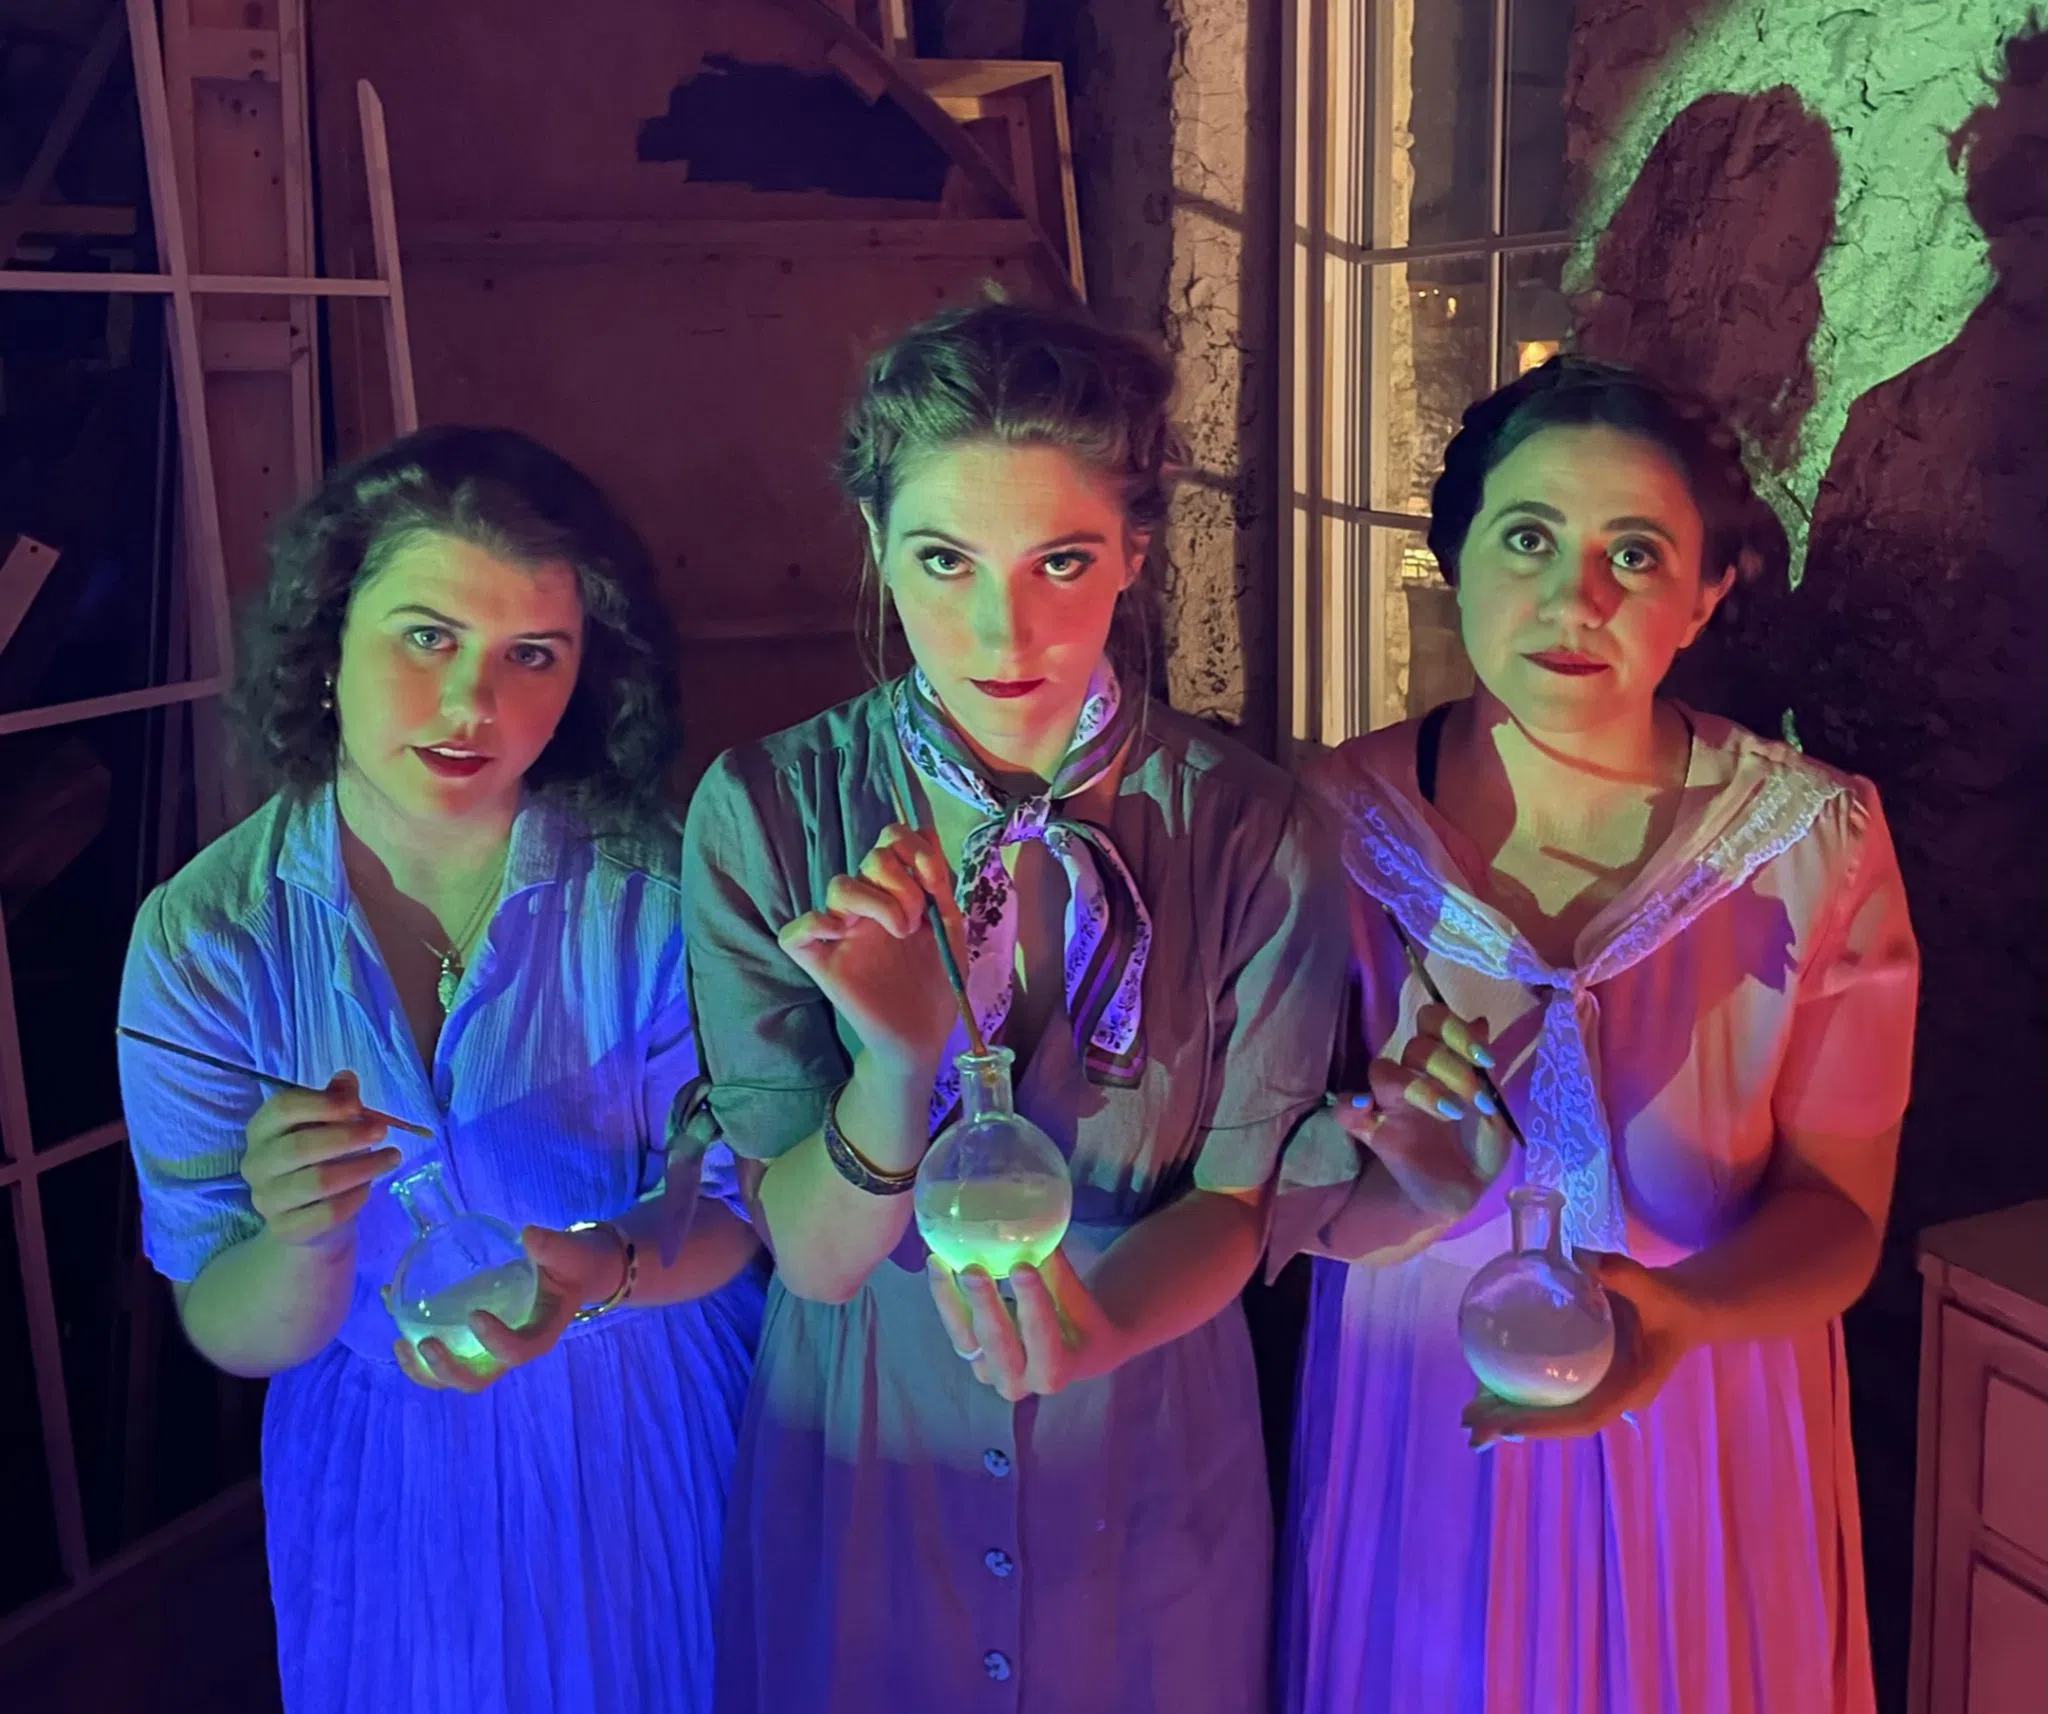 Win tickets to see "Radium Girls" all this week on the Billie and Friends show.